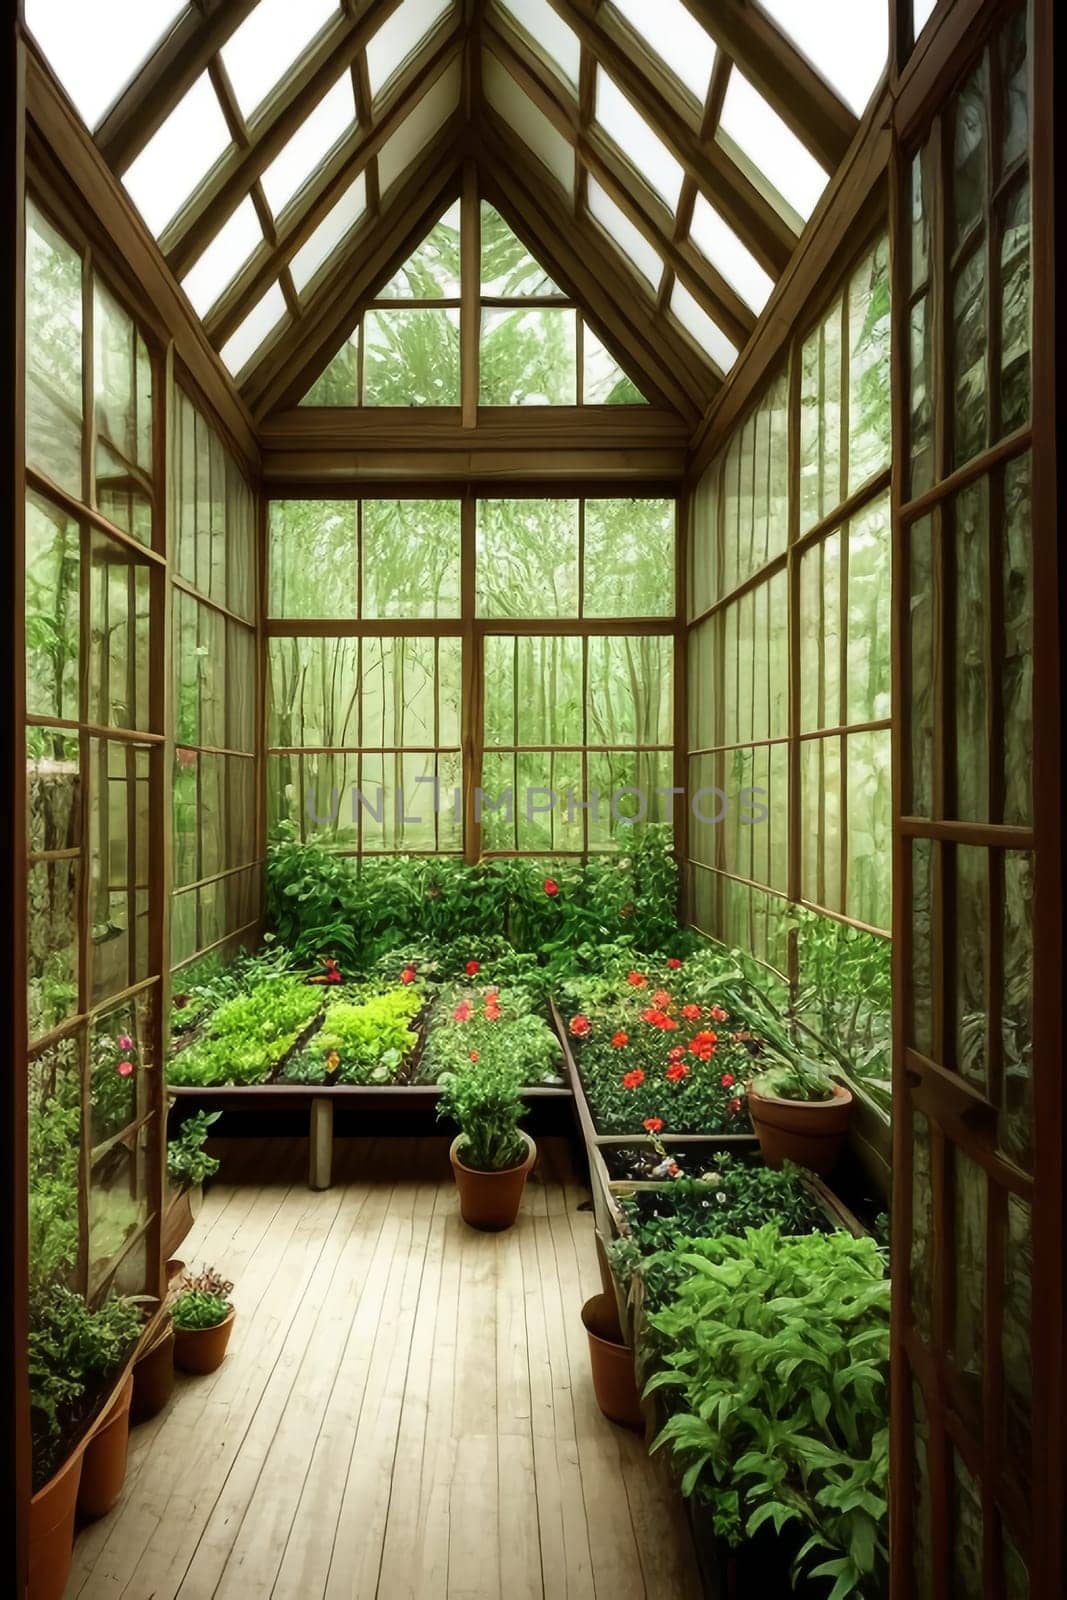 A spacious botanical garden in a large greenhouse. The concept of gardening and gardening